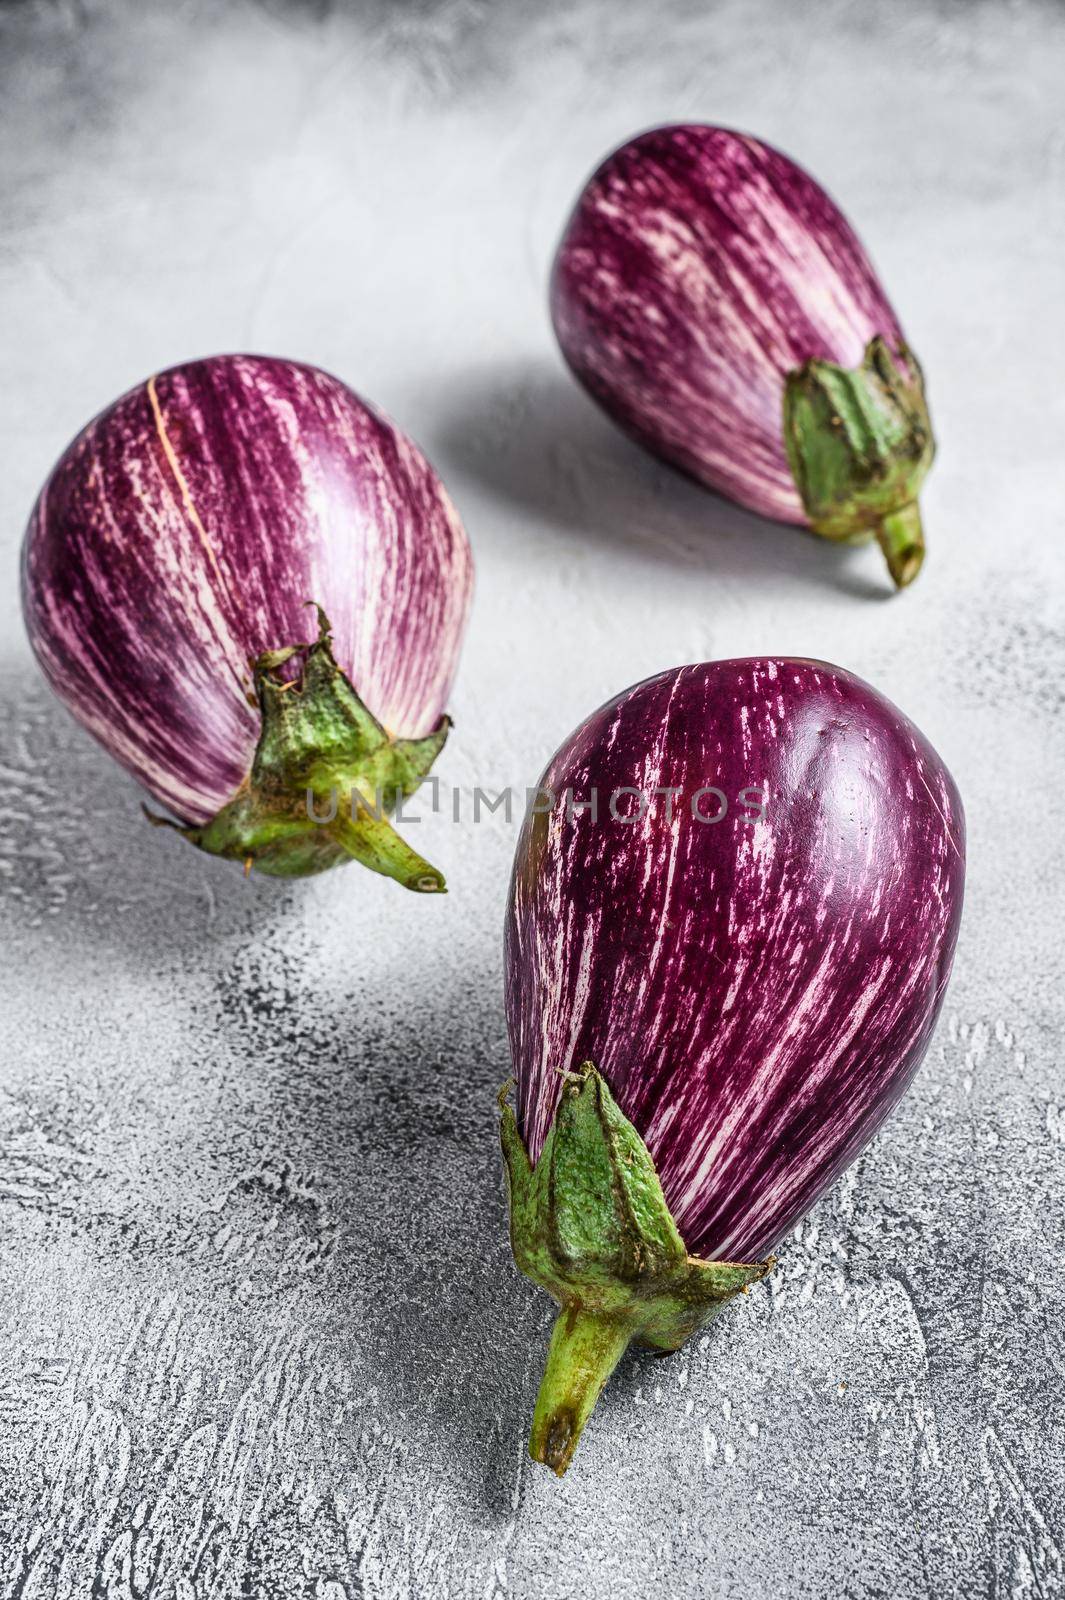 Raw small purple Asian eggplants. White background. Top view.